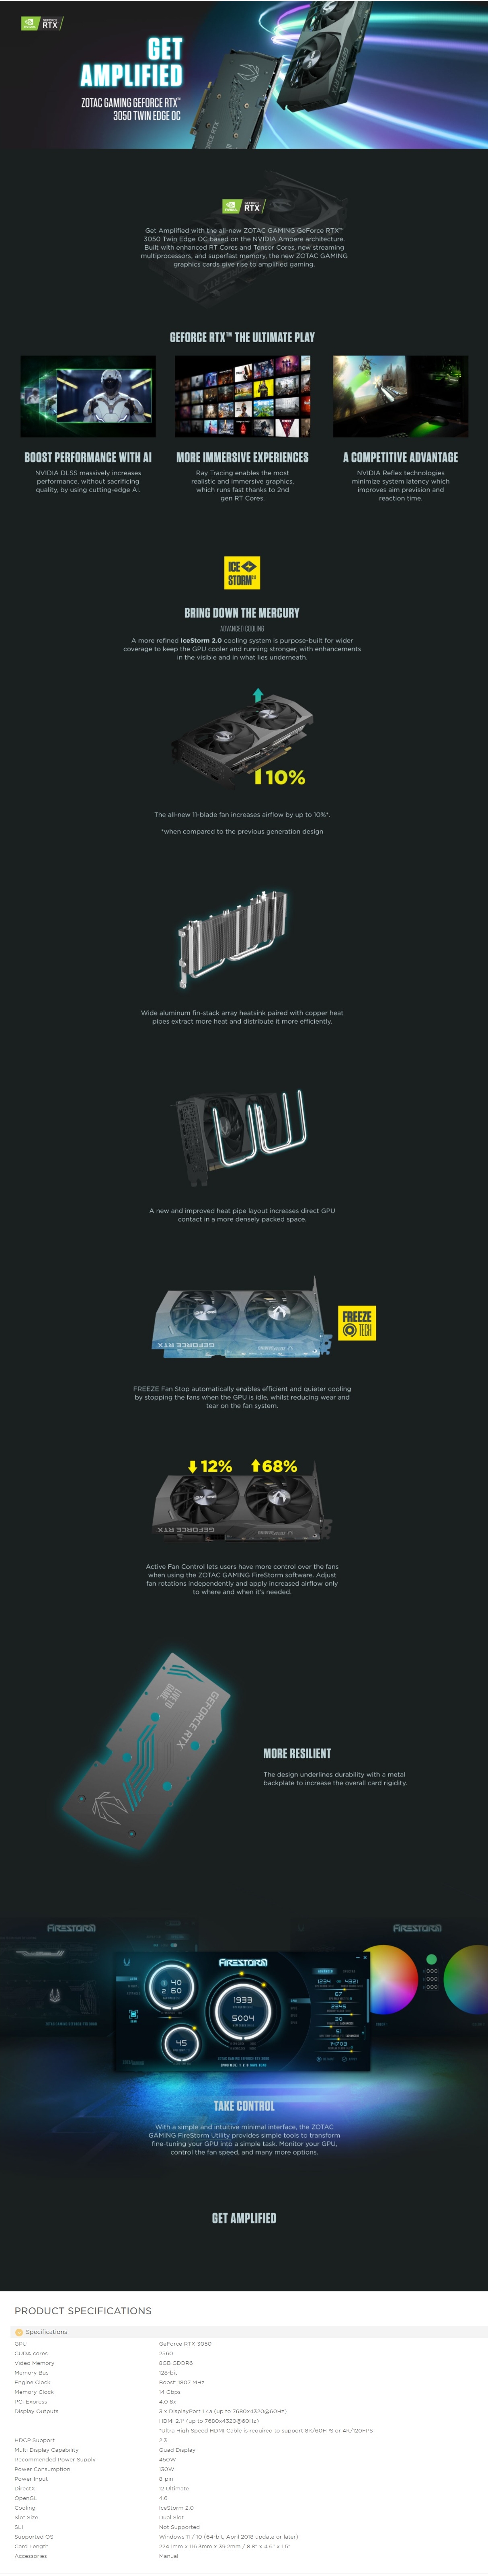 A large marketing image providing additional information about the product ZOTAC GAMING GeForce RTX 3050 Twin Edge OC 8GB GDDR6 - Additional alt info not provided